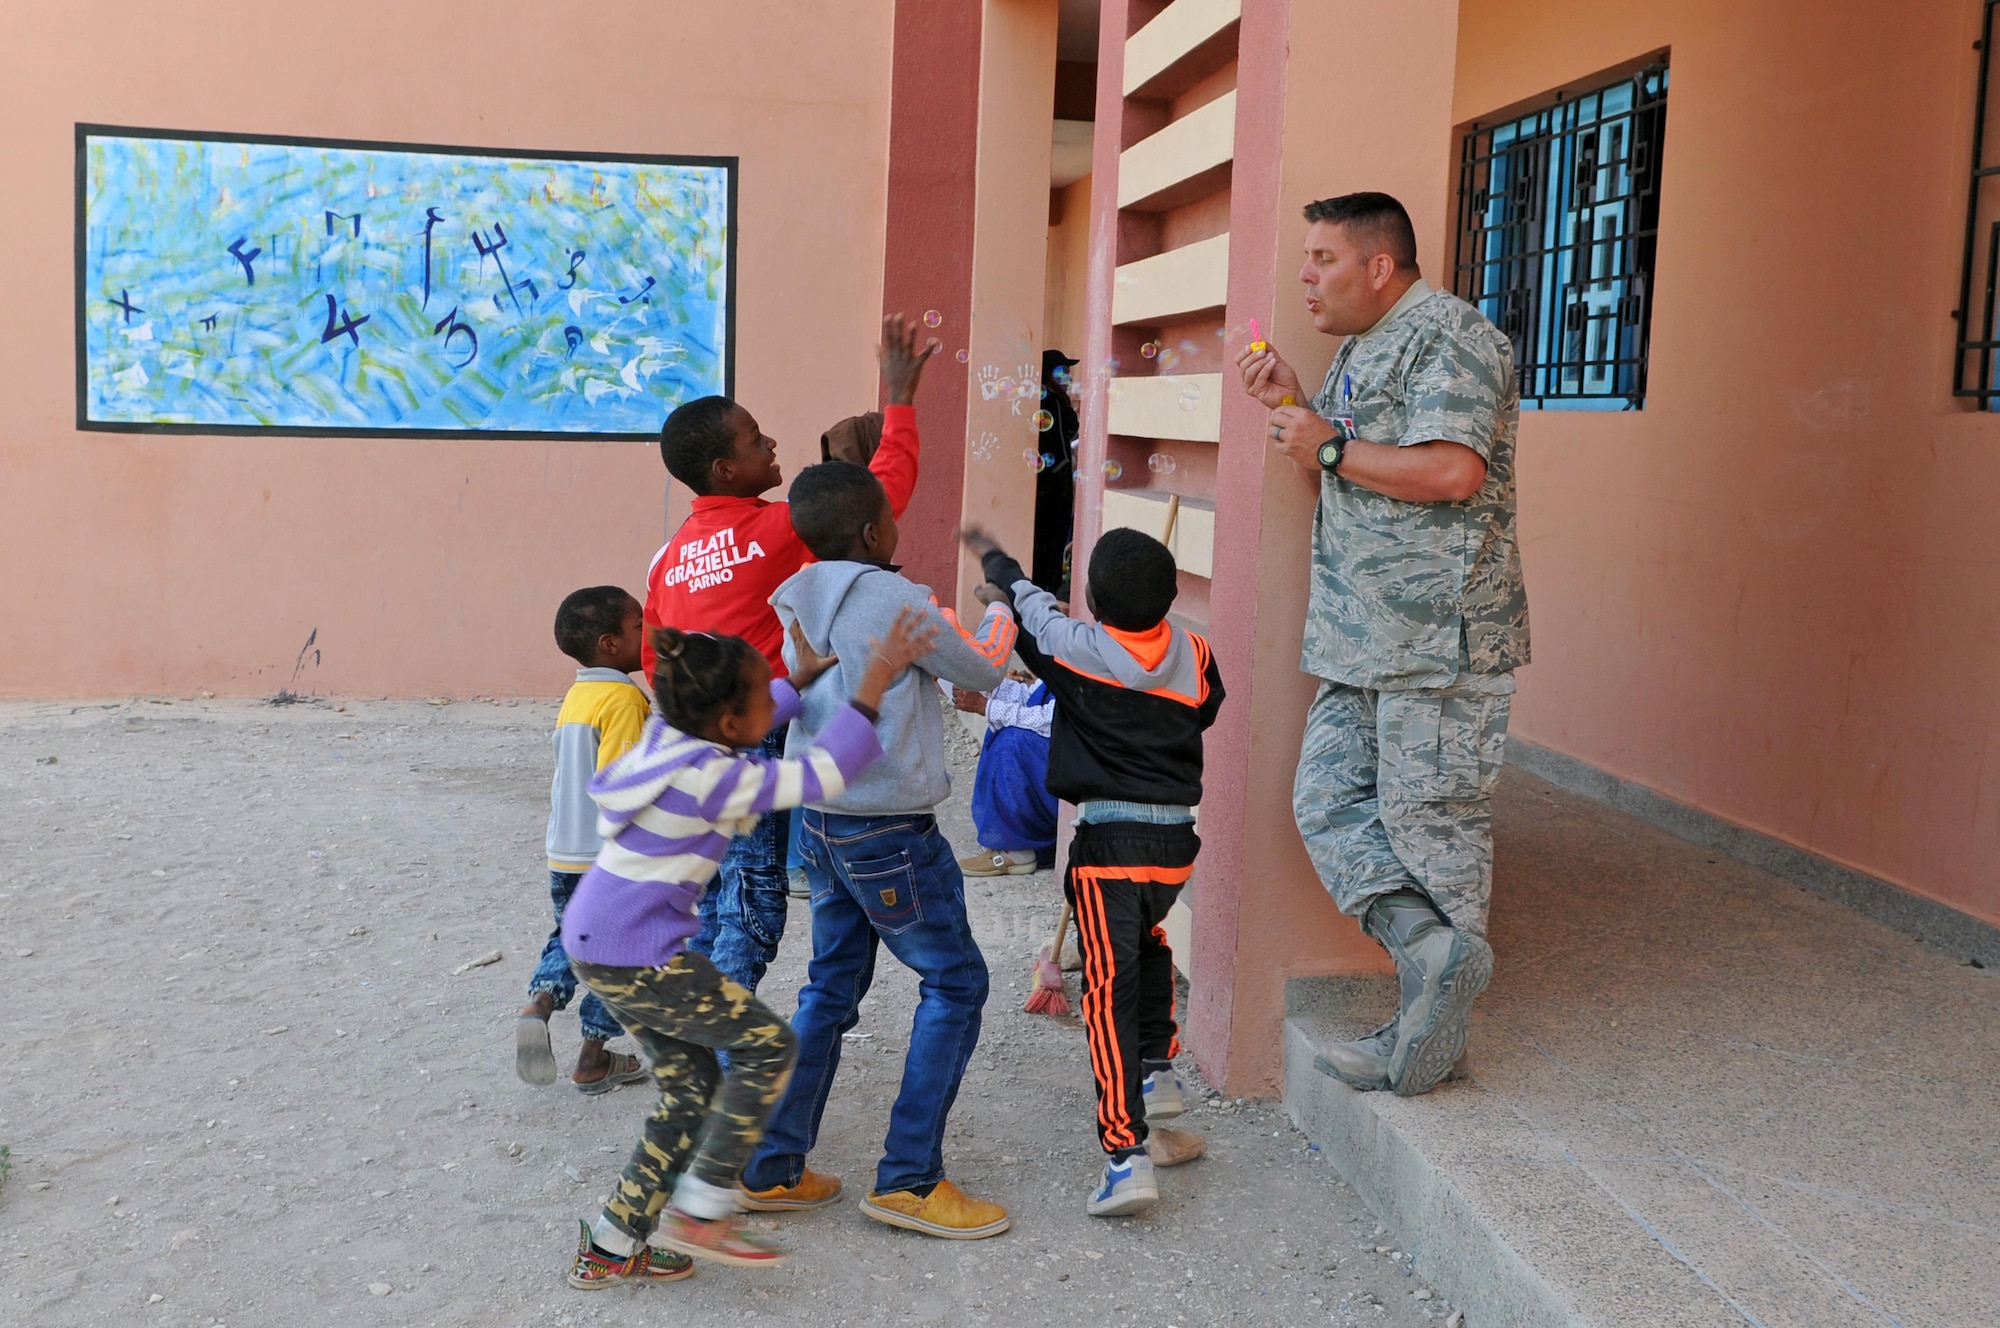 Staff Sgt. Erik Bornemeier, a medical technician with the 151st Medical Group, entertains a group of children waiting outside of the clinic in Issafen, Morocco on April 25, 2017 during African Lion. (U.S. Air National Guard photo by Tech. Sgt. Annie Edwards)